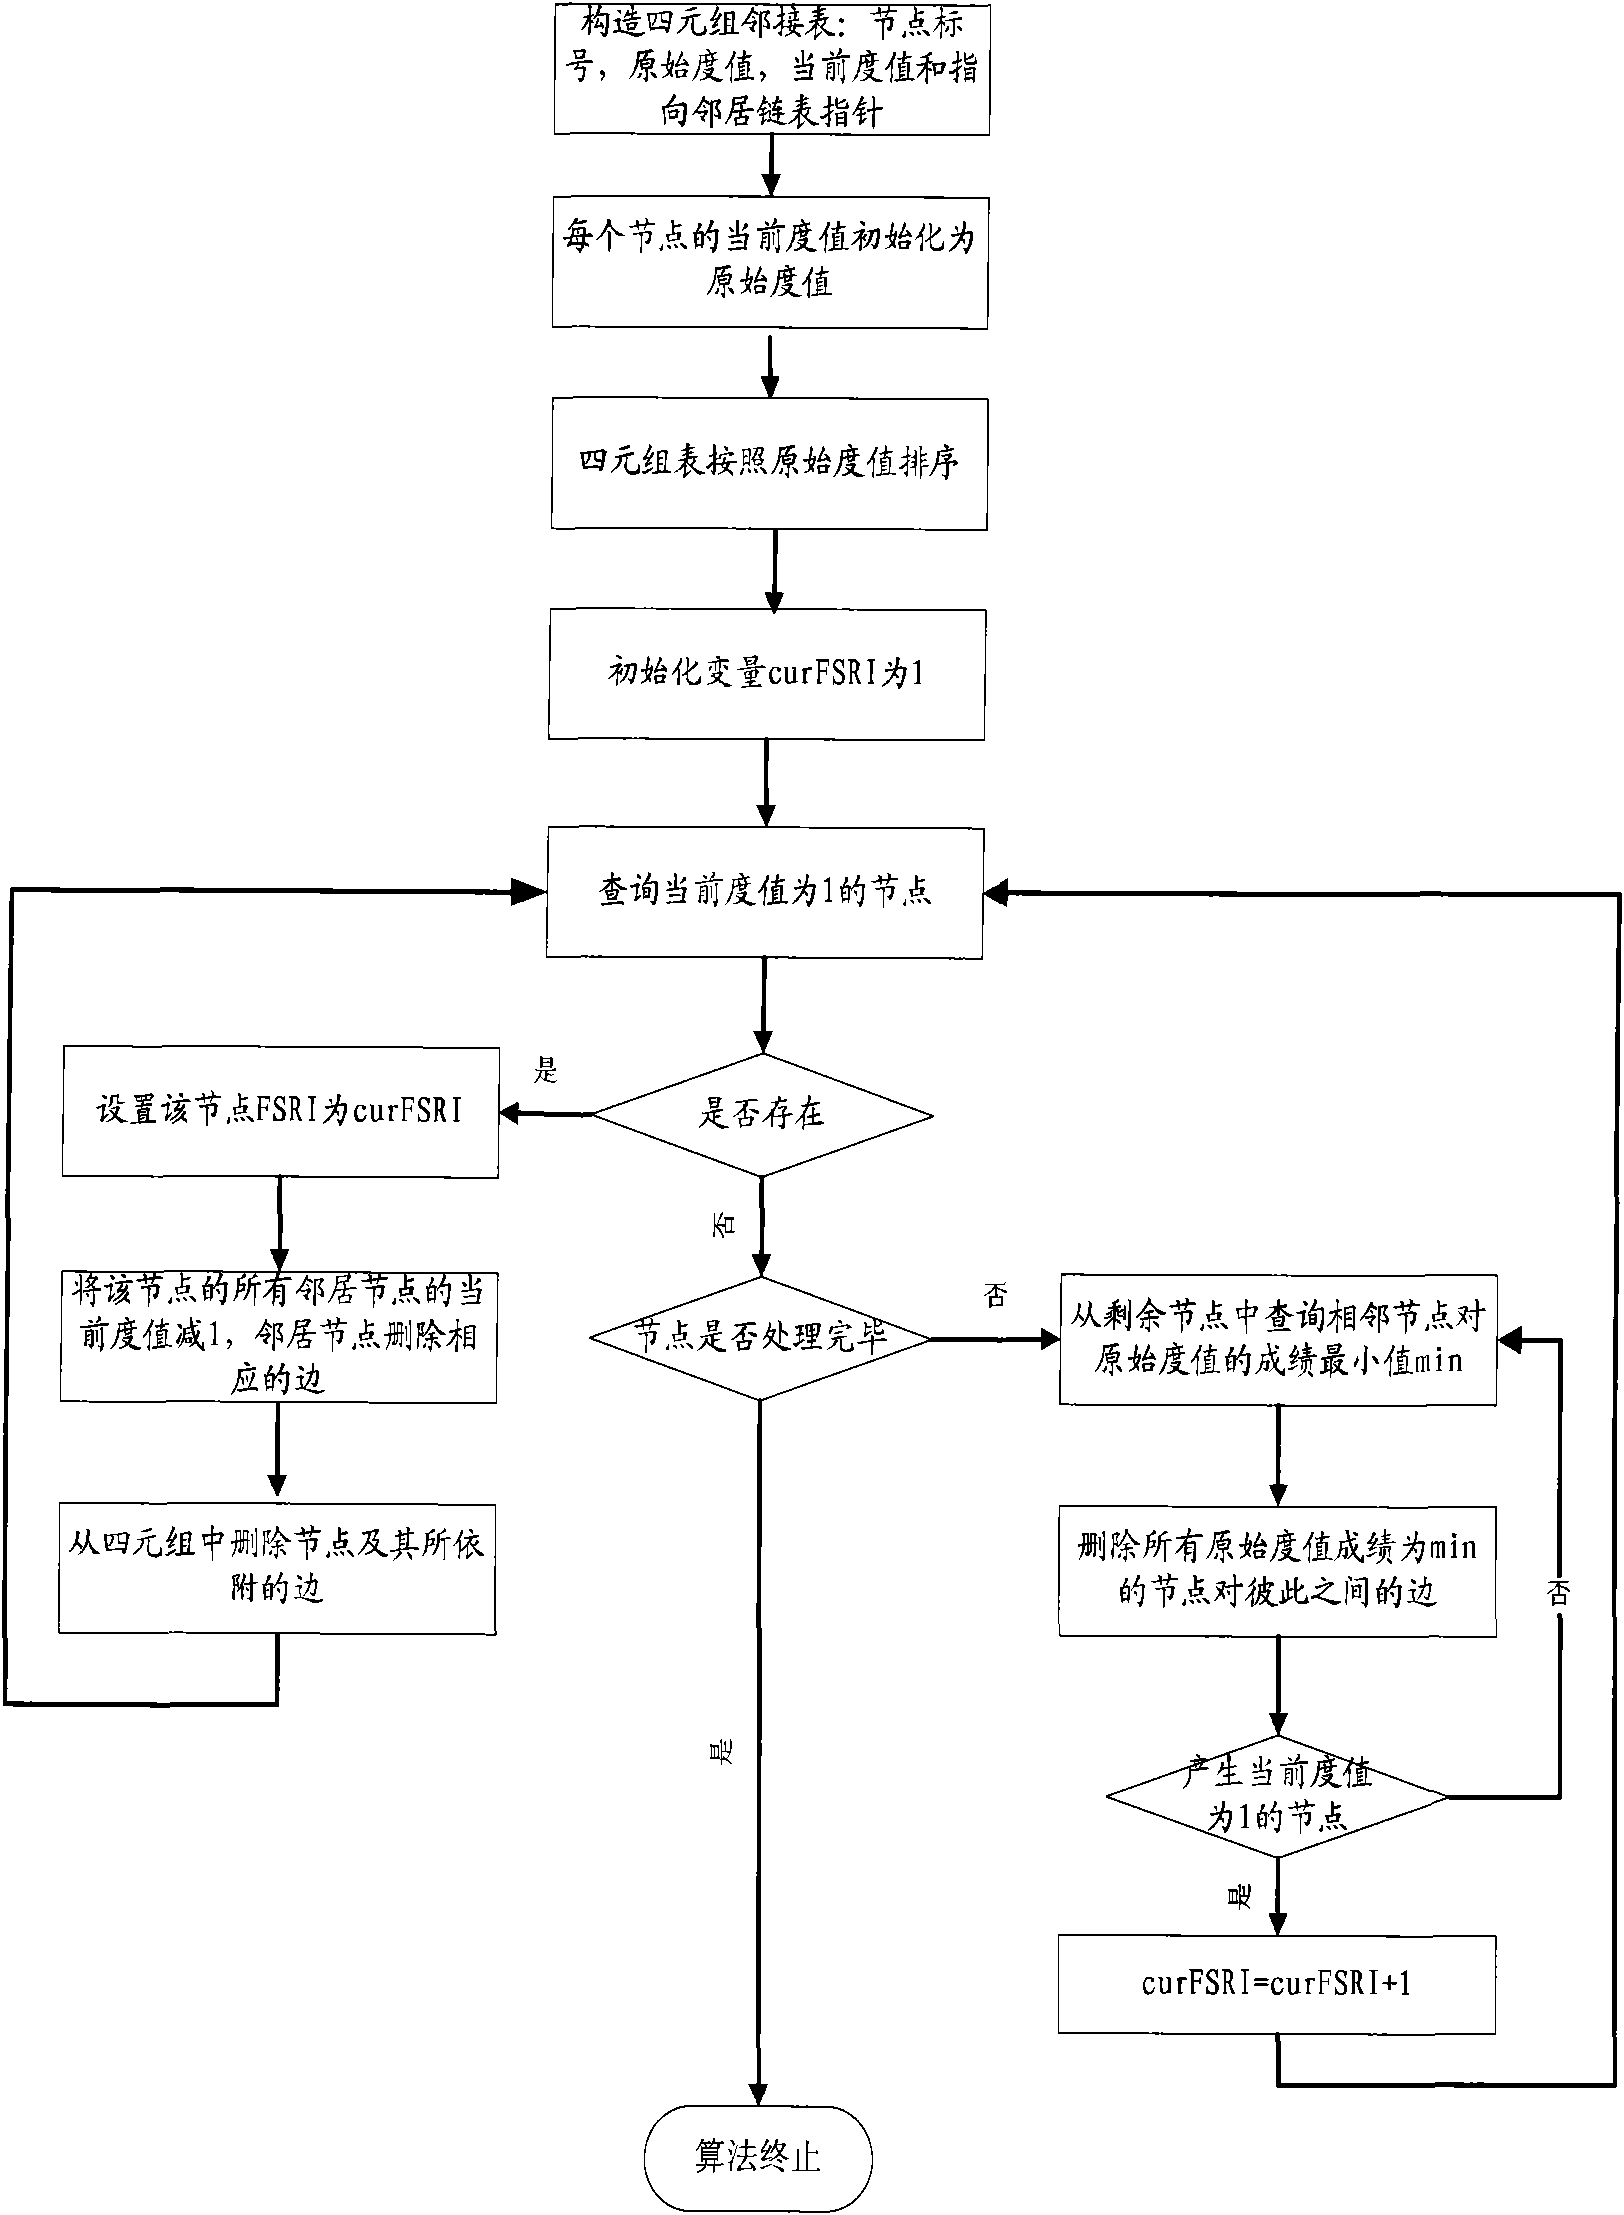 Method and device for selecting forward nodes